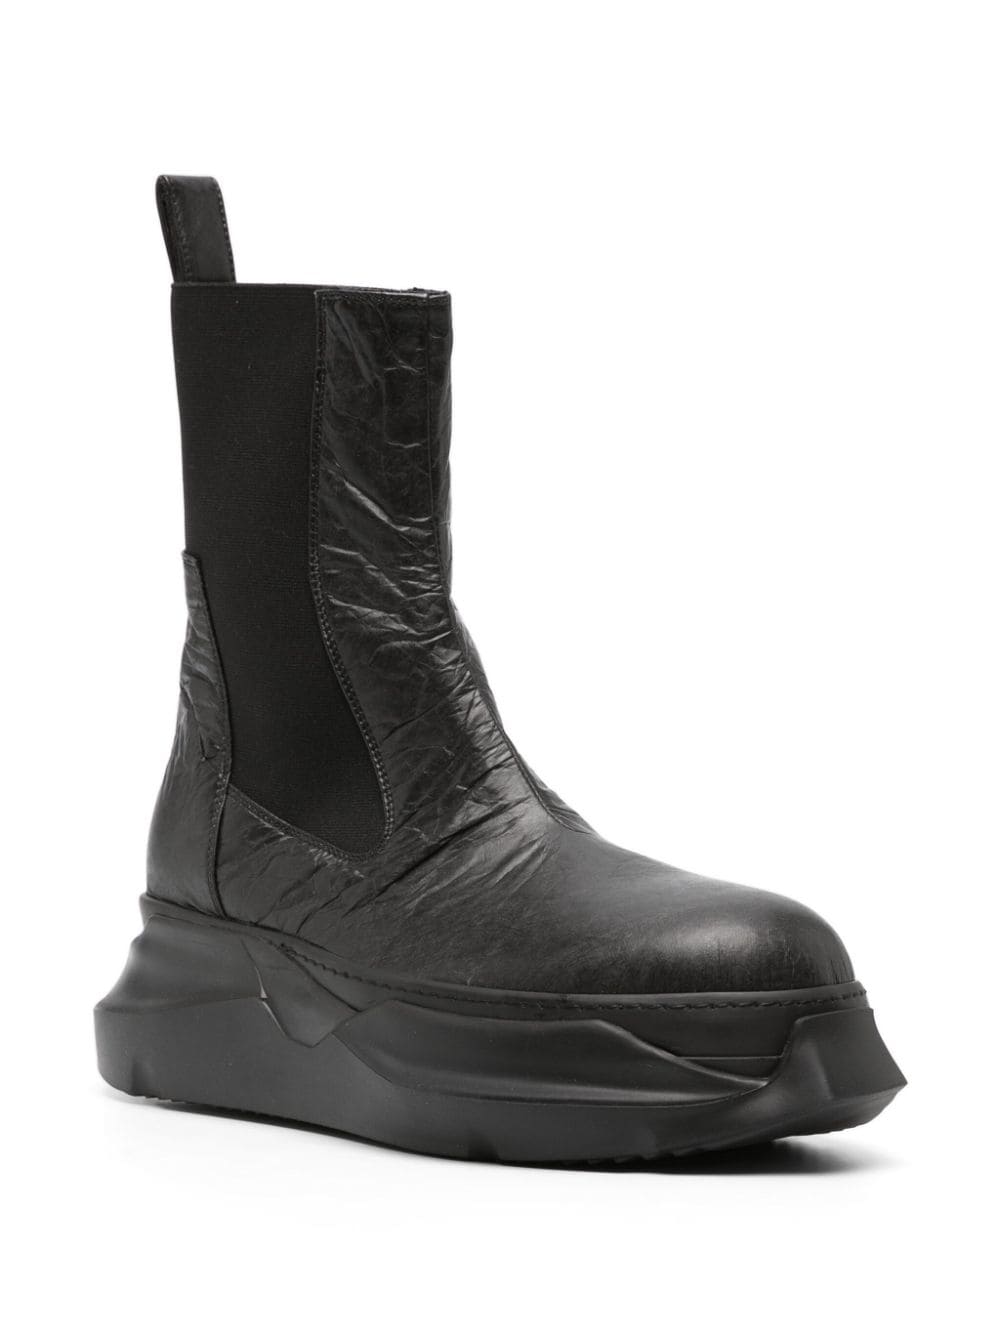 RICK OWENS DRKSHDW Beatle Abstract Boots